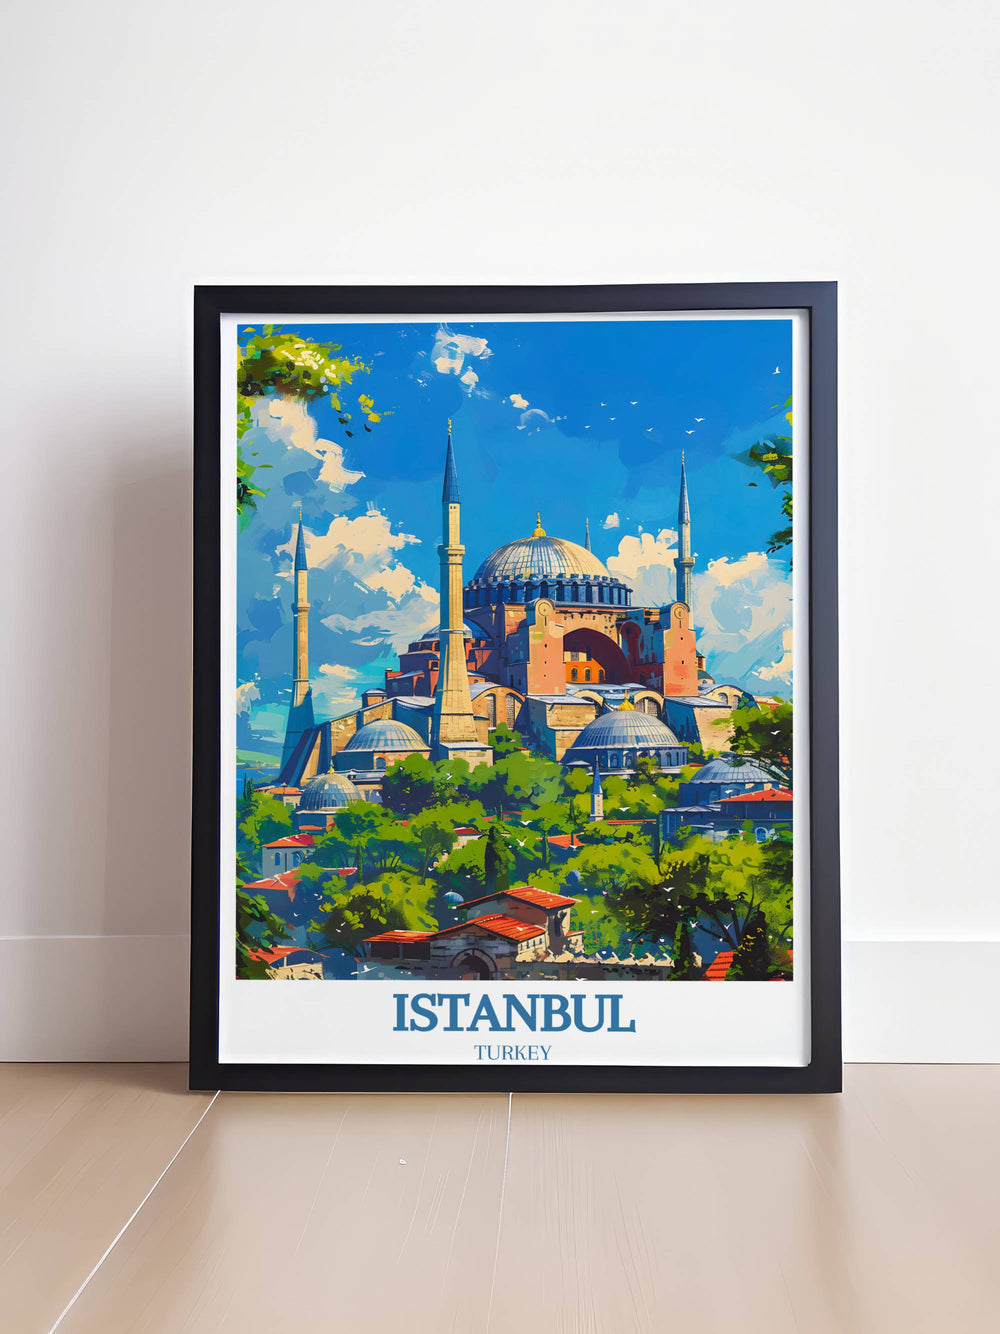 Istanbul travel poster featuring the Hagia Sophia, ideal for those who admire its majestic domes and intricate design from the Byzantine era.